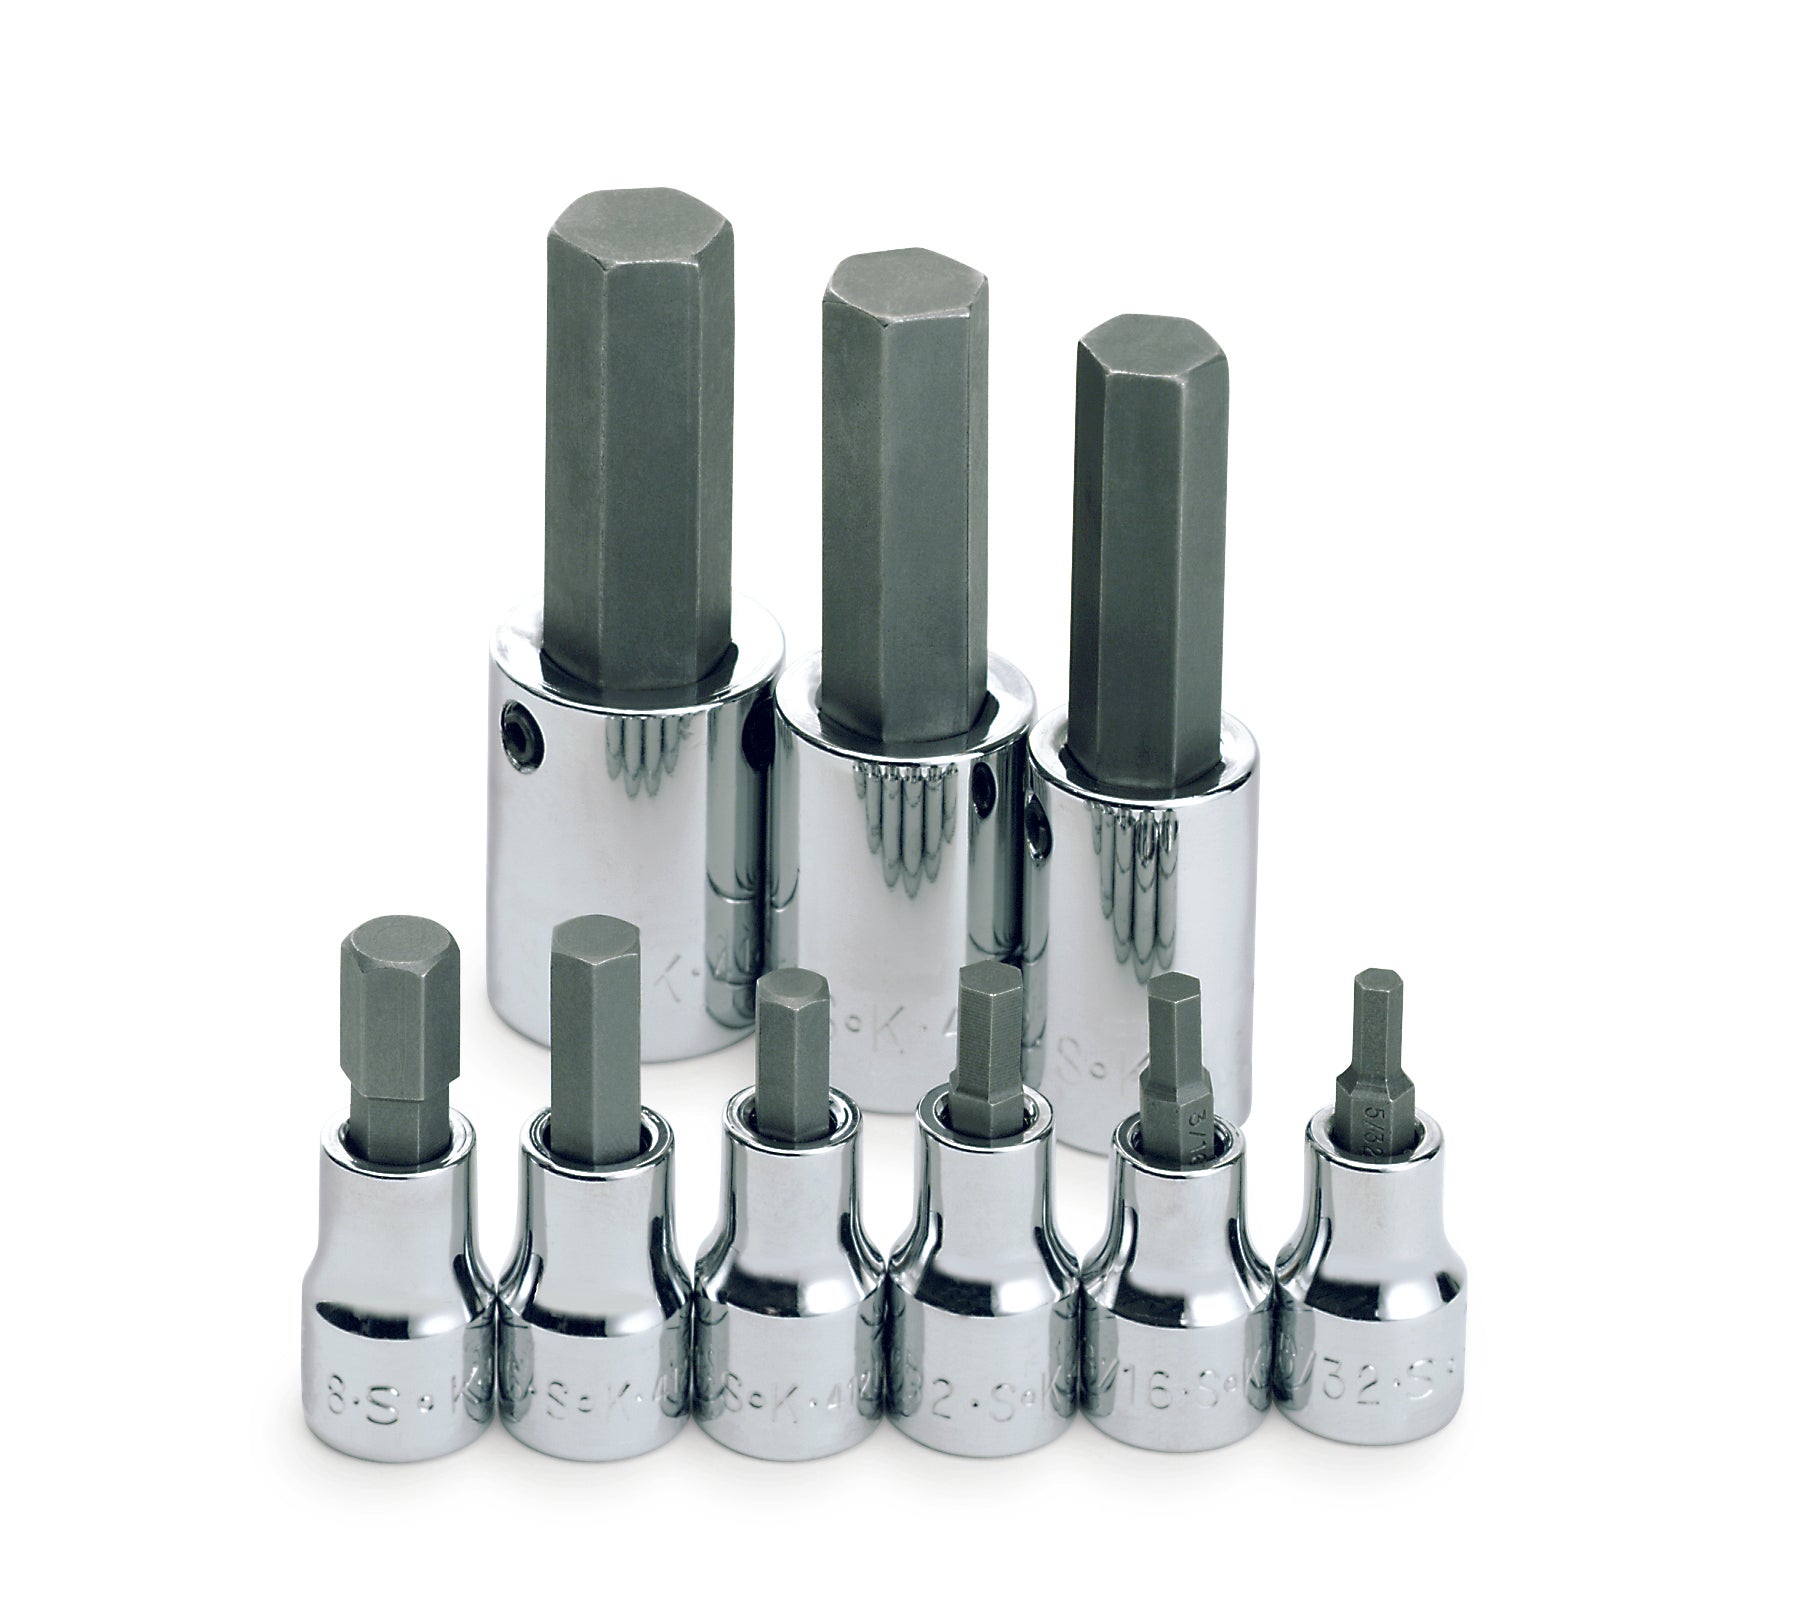 Wright Tool 360 3/8 and 1/2 Drive Hex Bit Sockets (9-Piece)